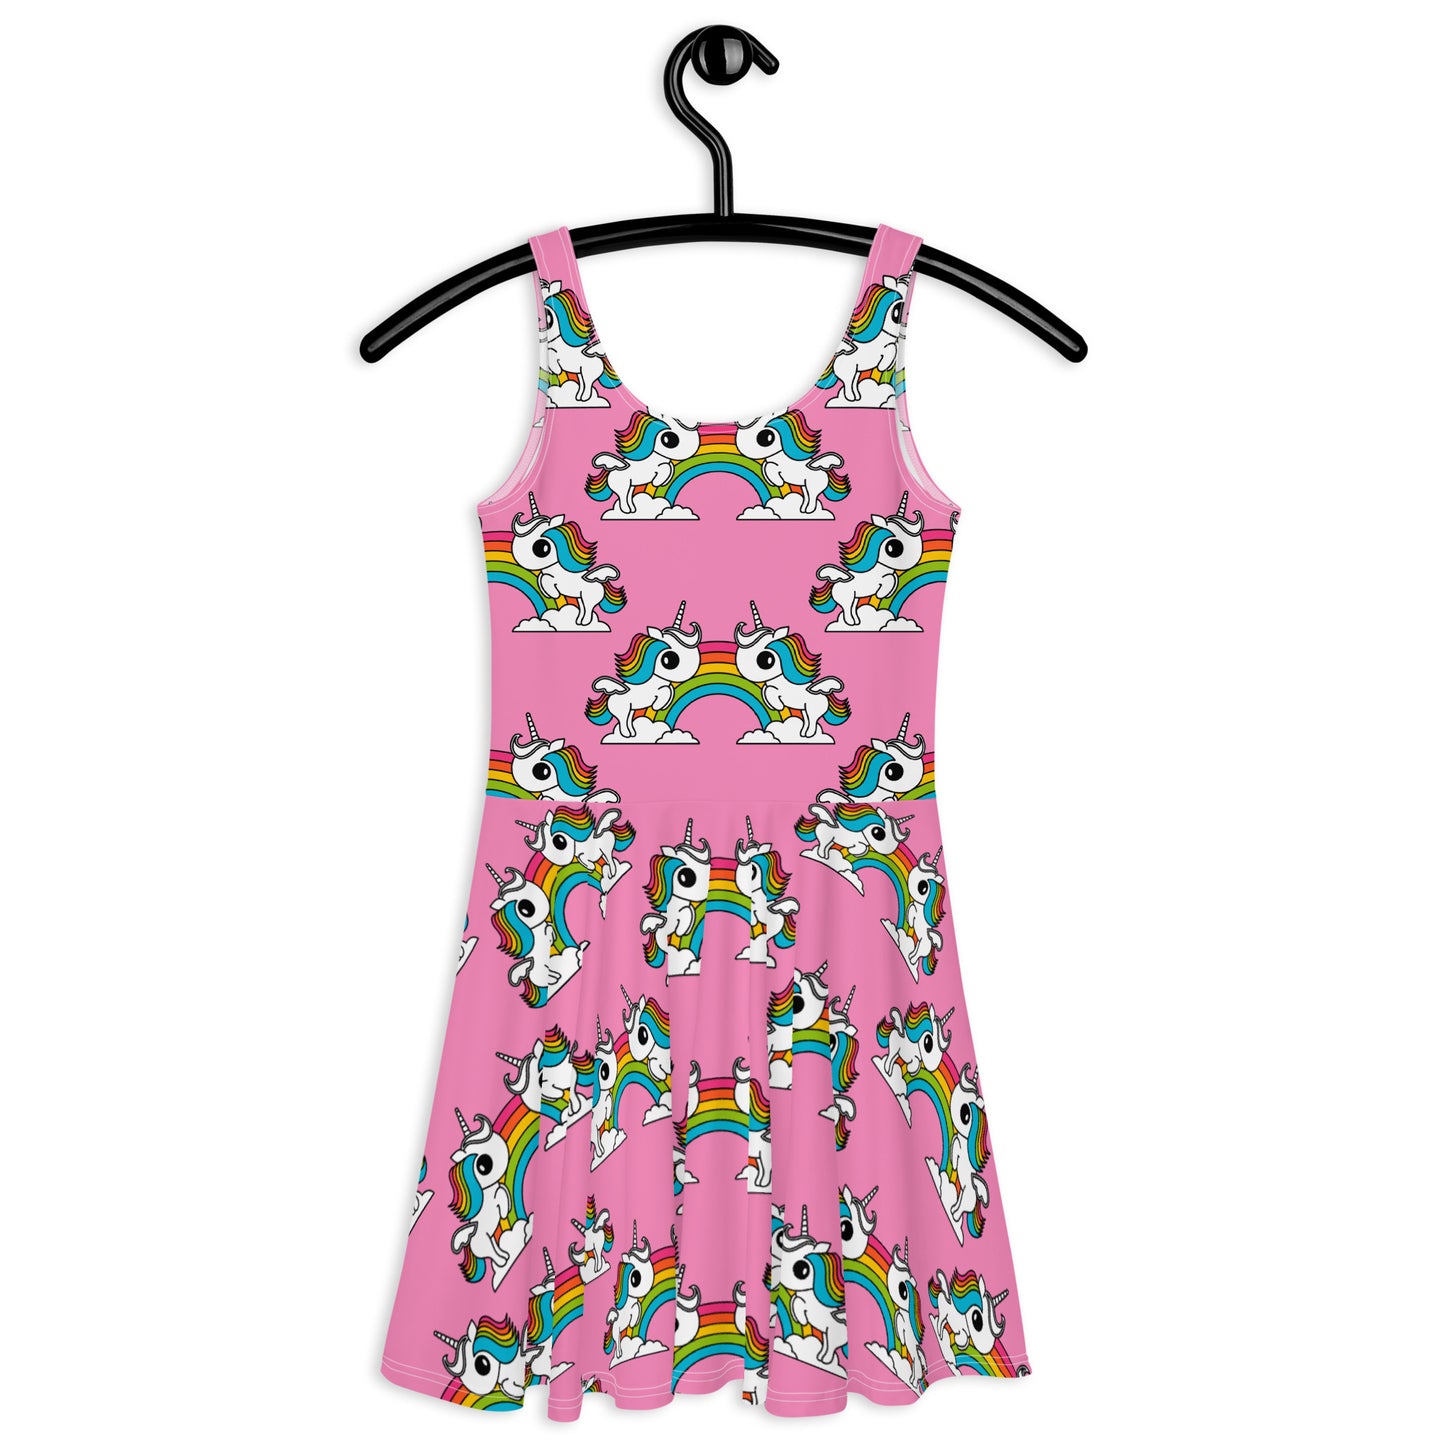 UNIQUE pink - Skater Dress with unicorns and rainbows